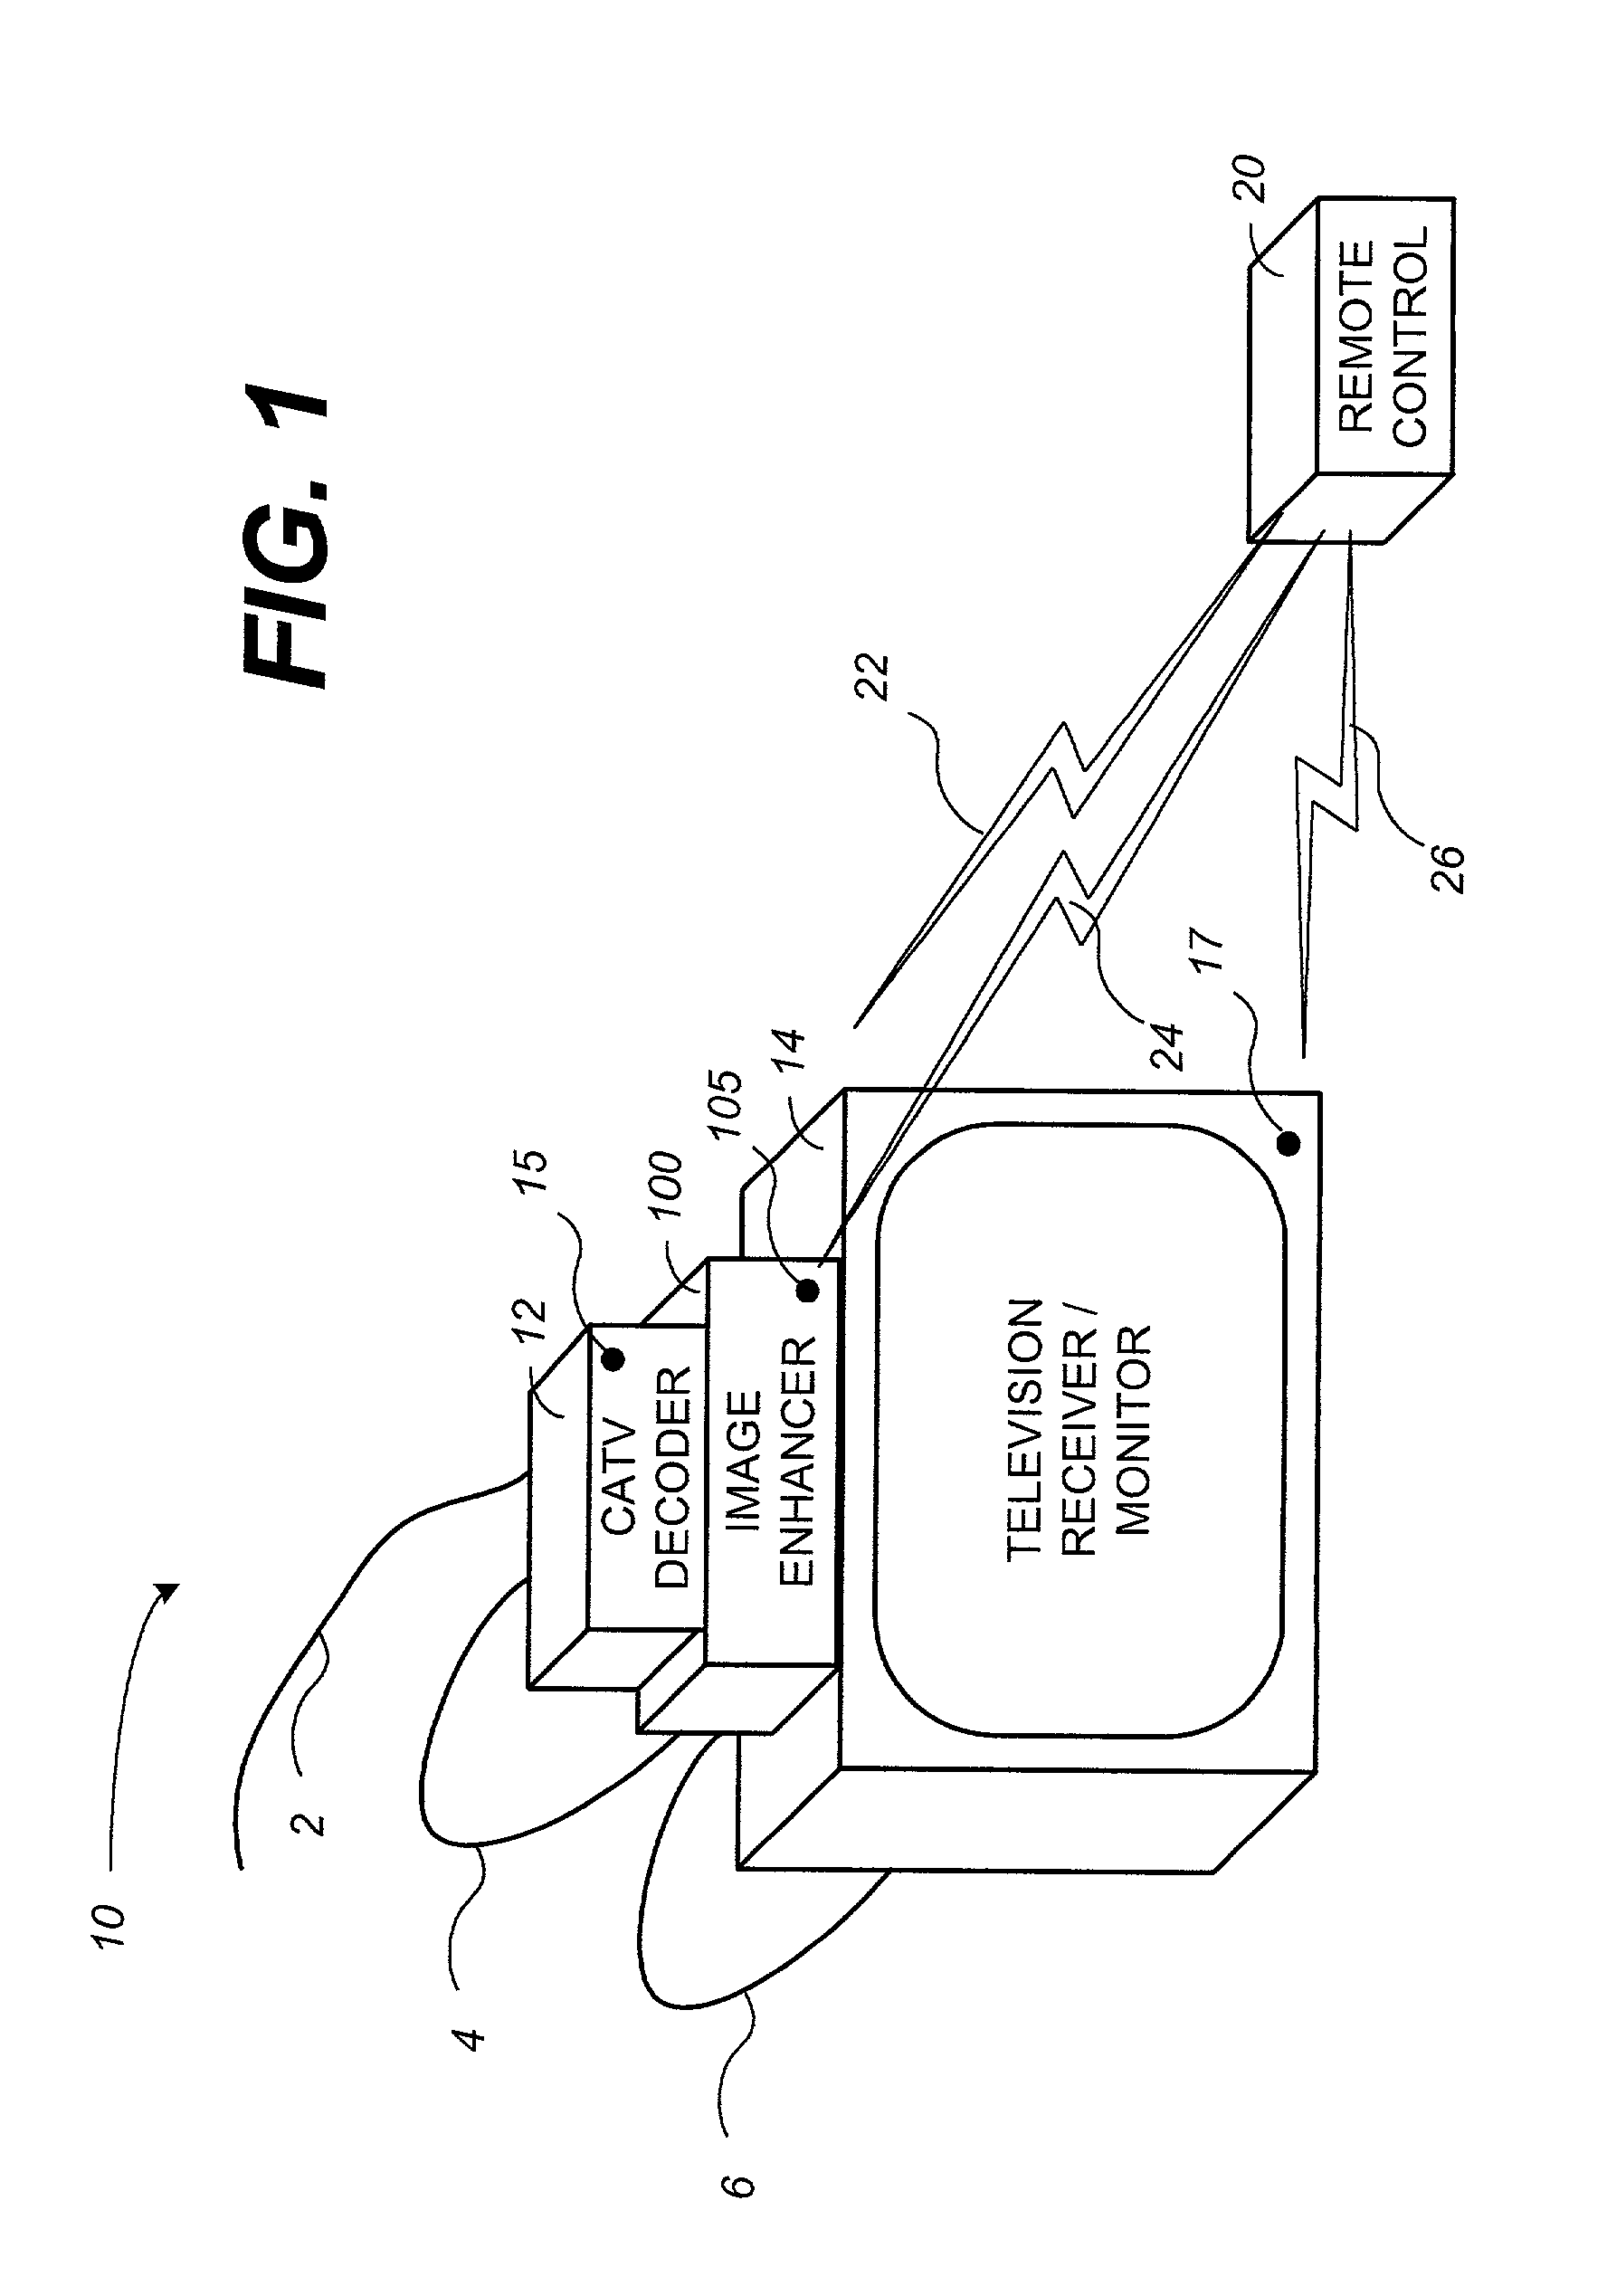 System and method for improving image quality in processed images